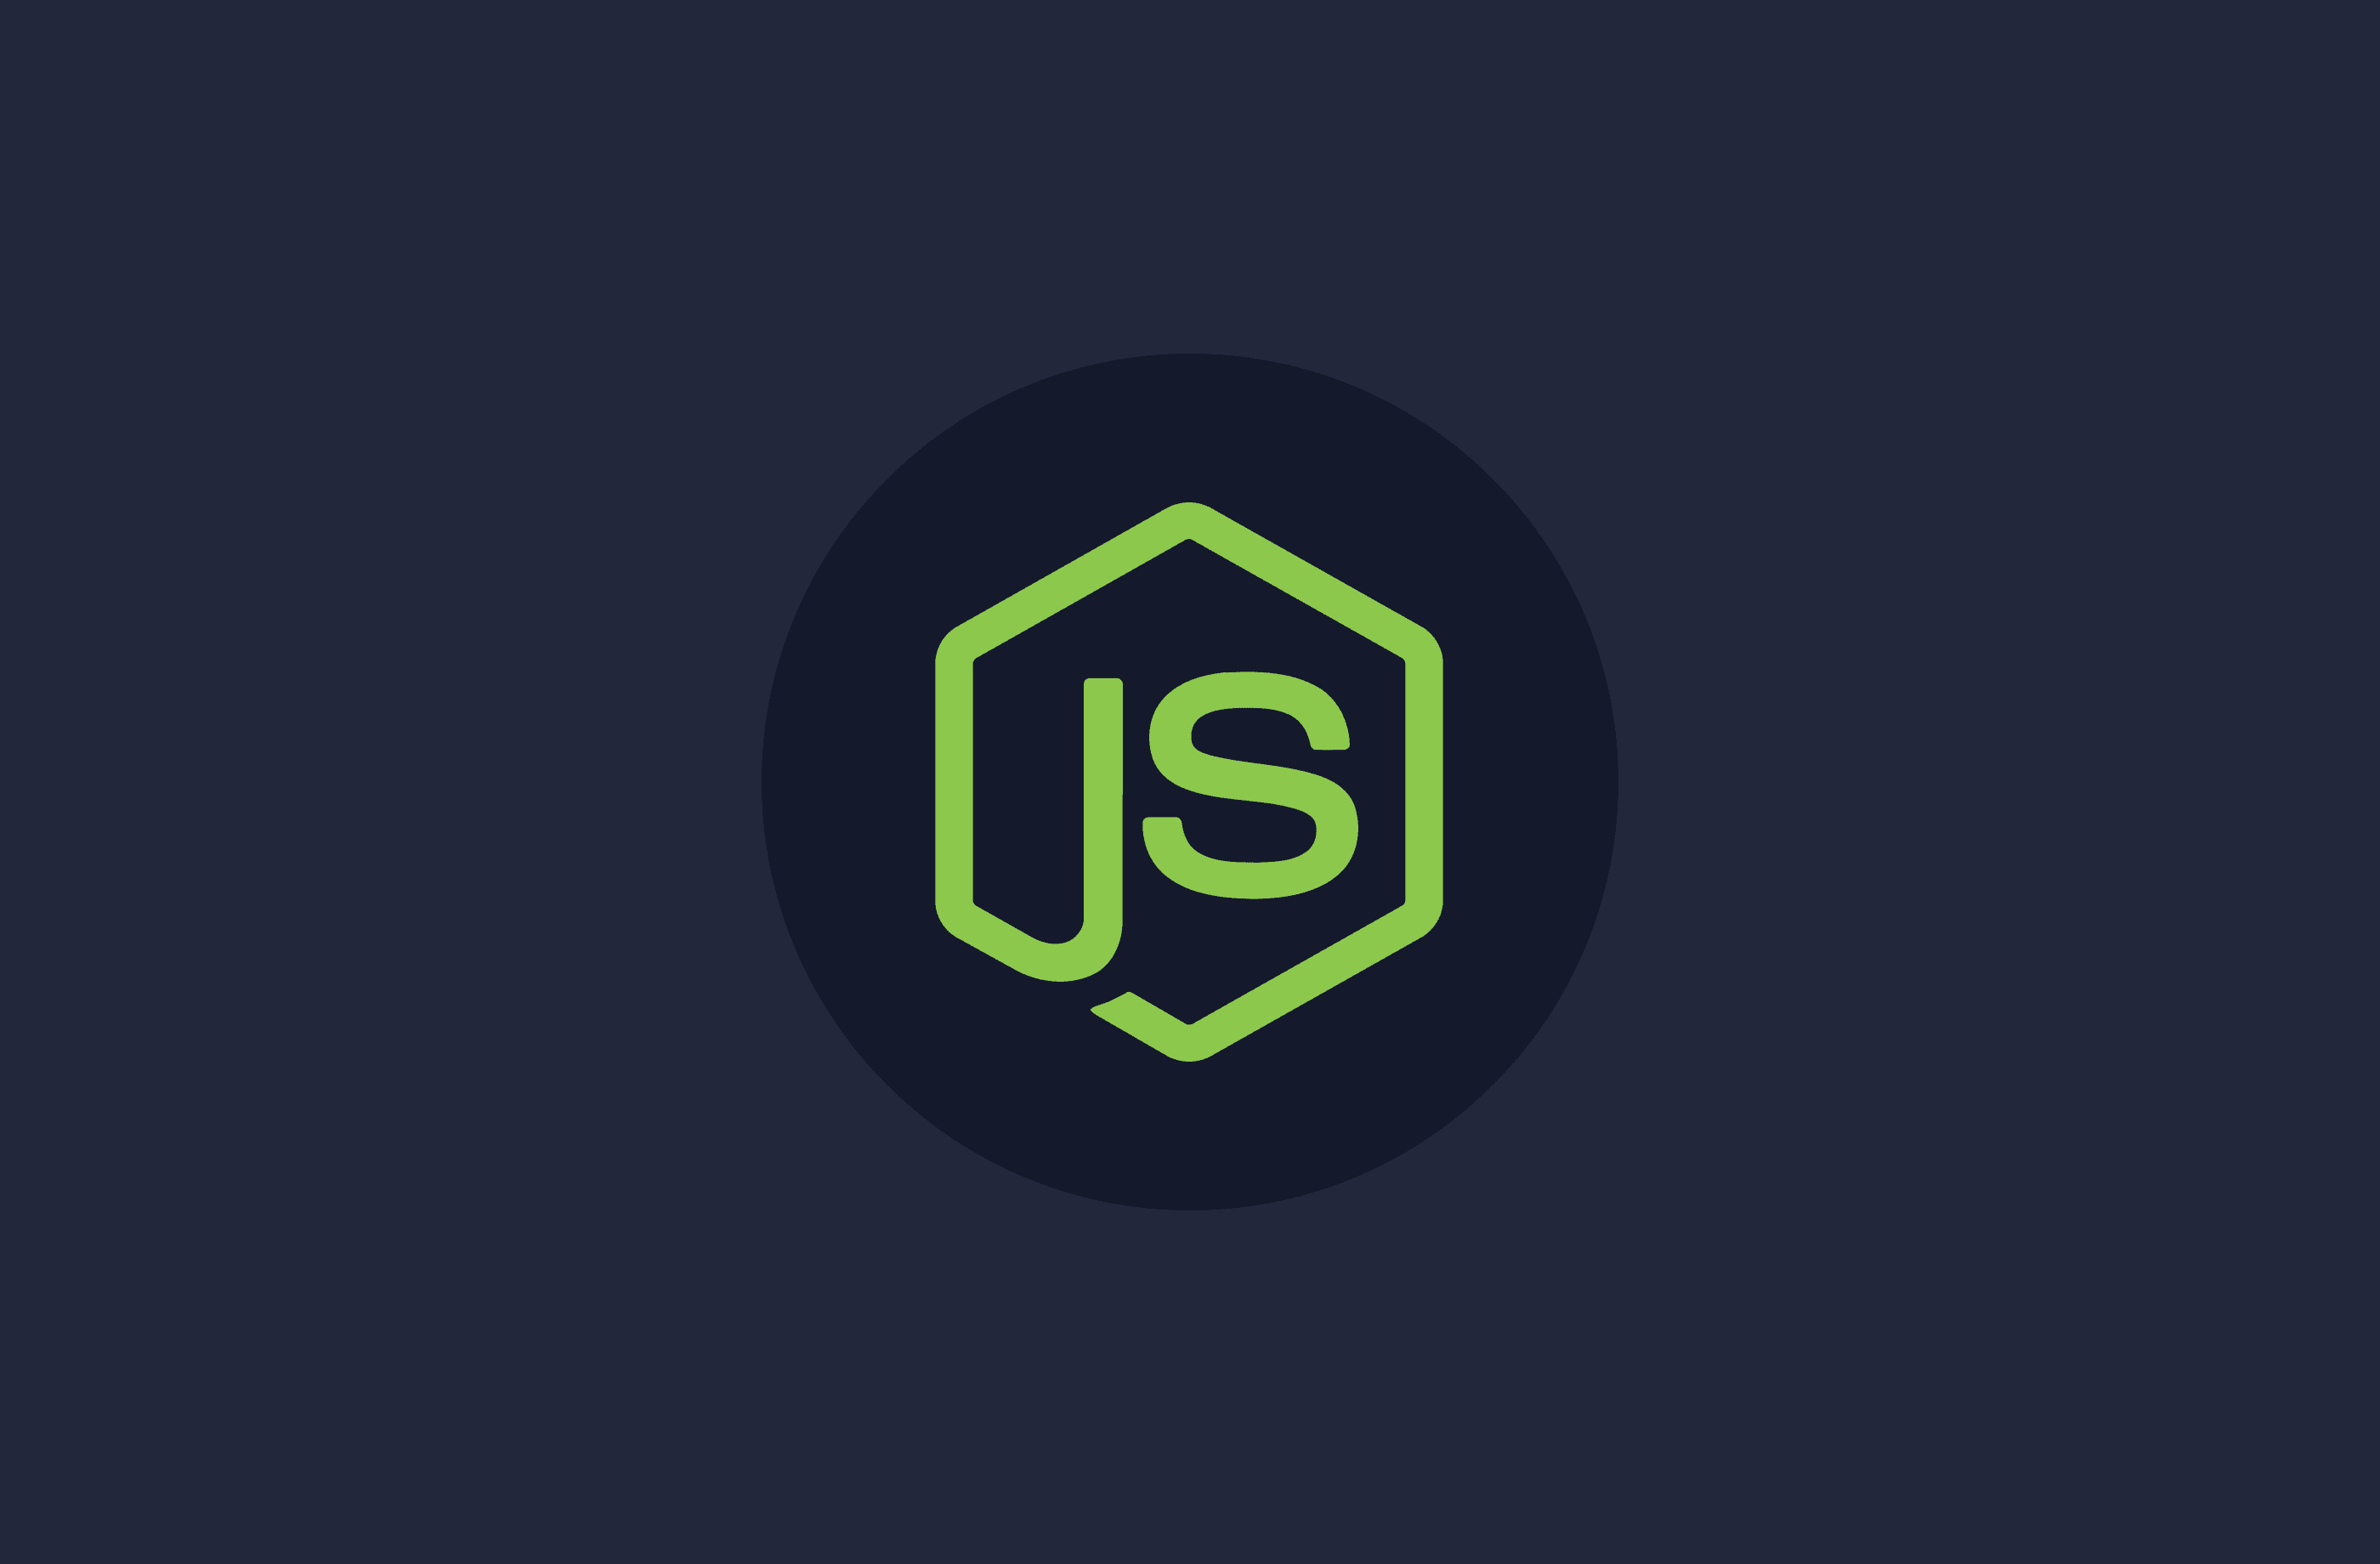 What's New in Node.js 19